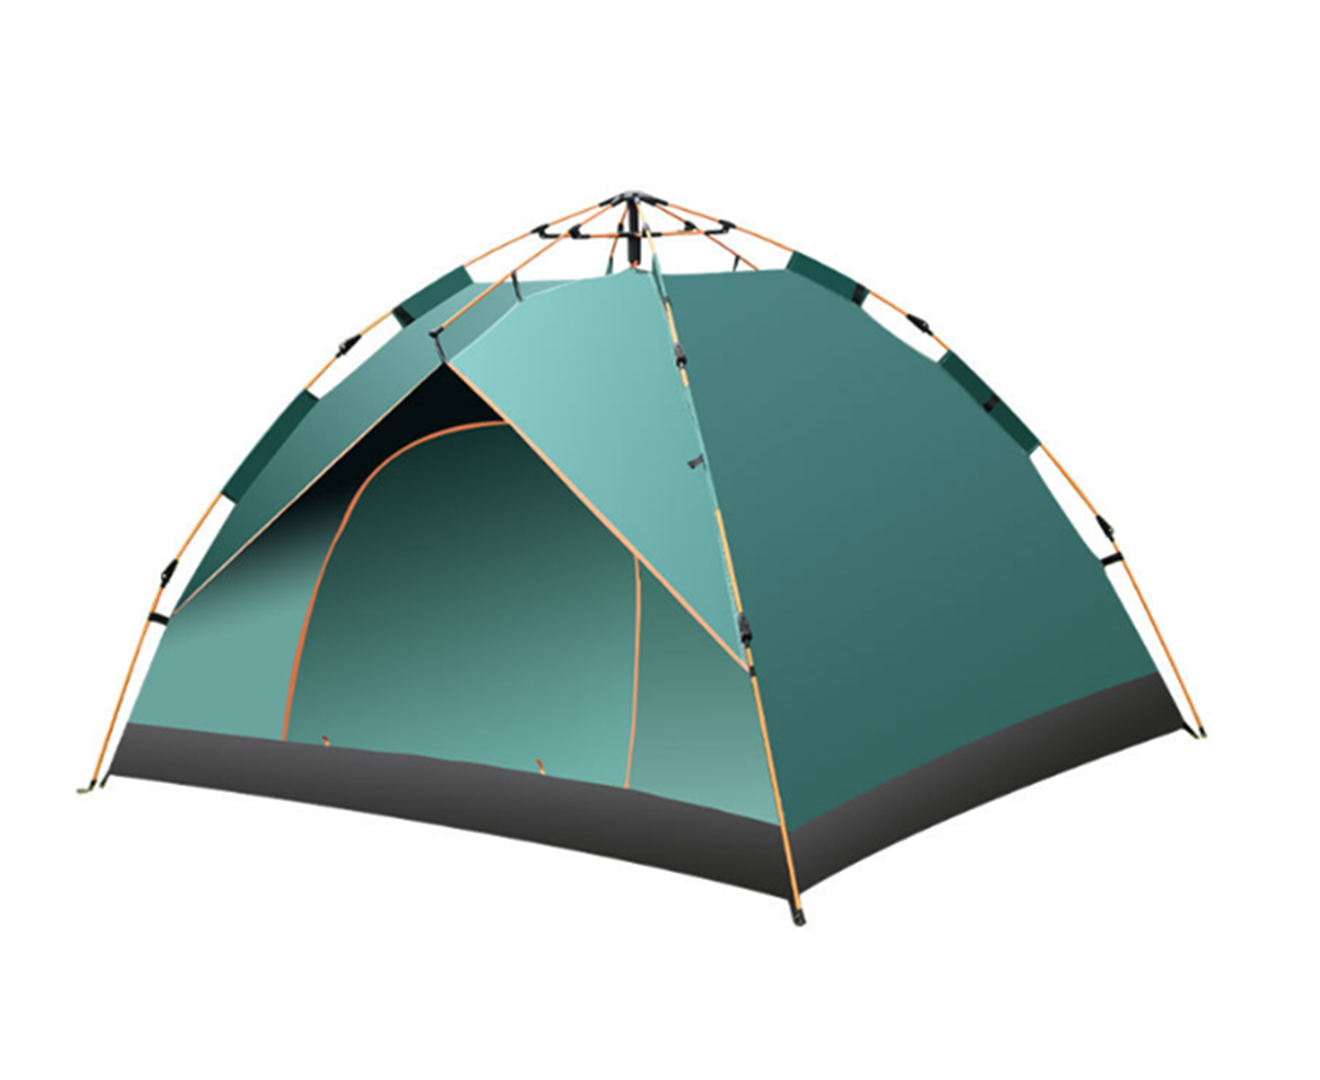 JunChang C04 Outdoor Camping Tent Fishing Sunshade Travel Beach 2 People Automatic Wigwam for Hiking Mountaineering